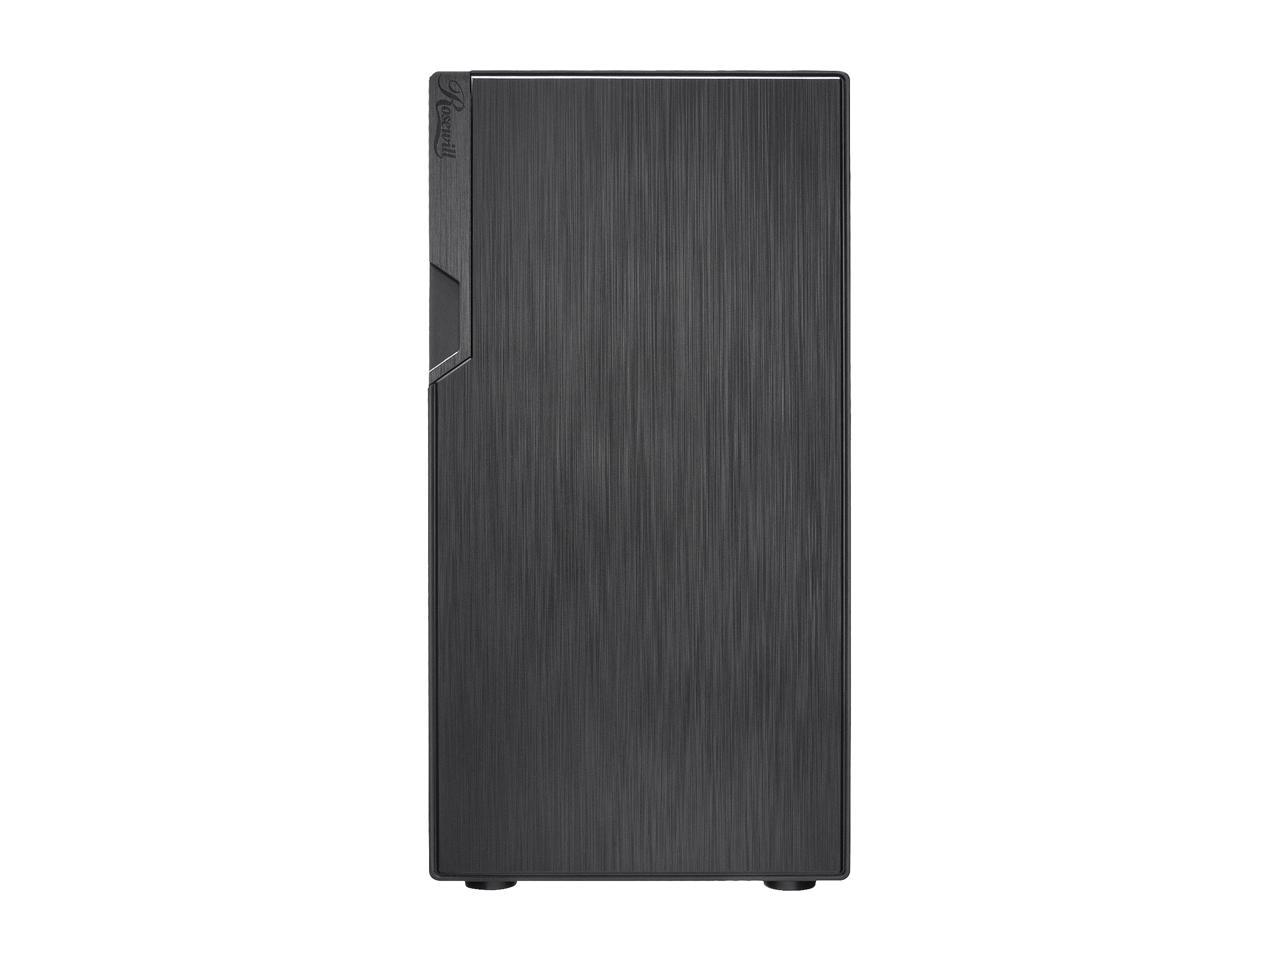 Rosewill FBM-X2 Micro ATX Mini Tower Desktop Gaming PC Computer Case, 240mm AIO Support, USB 3.0